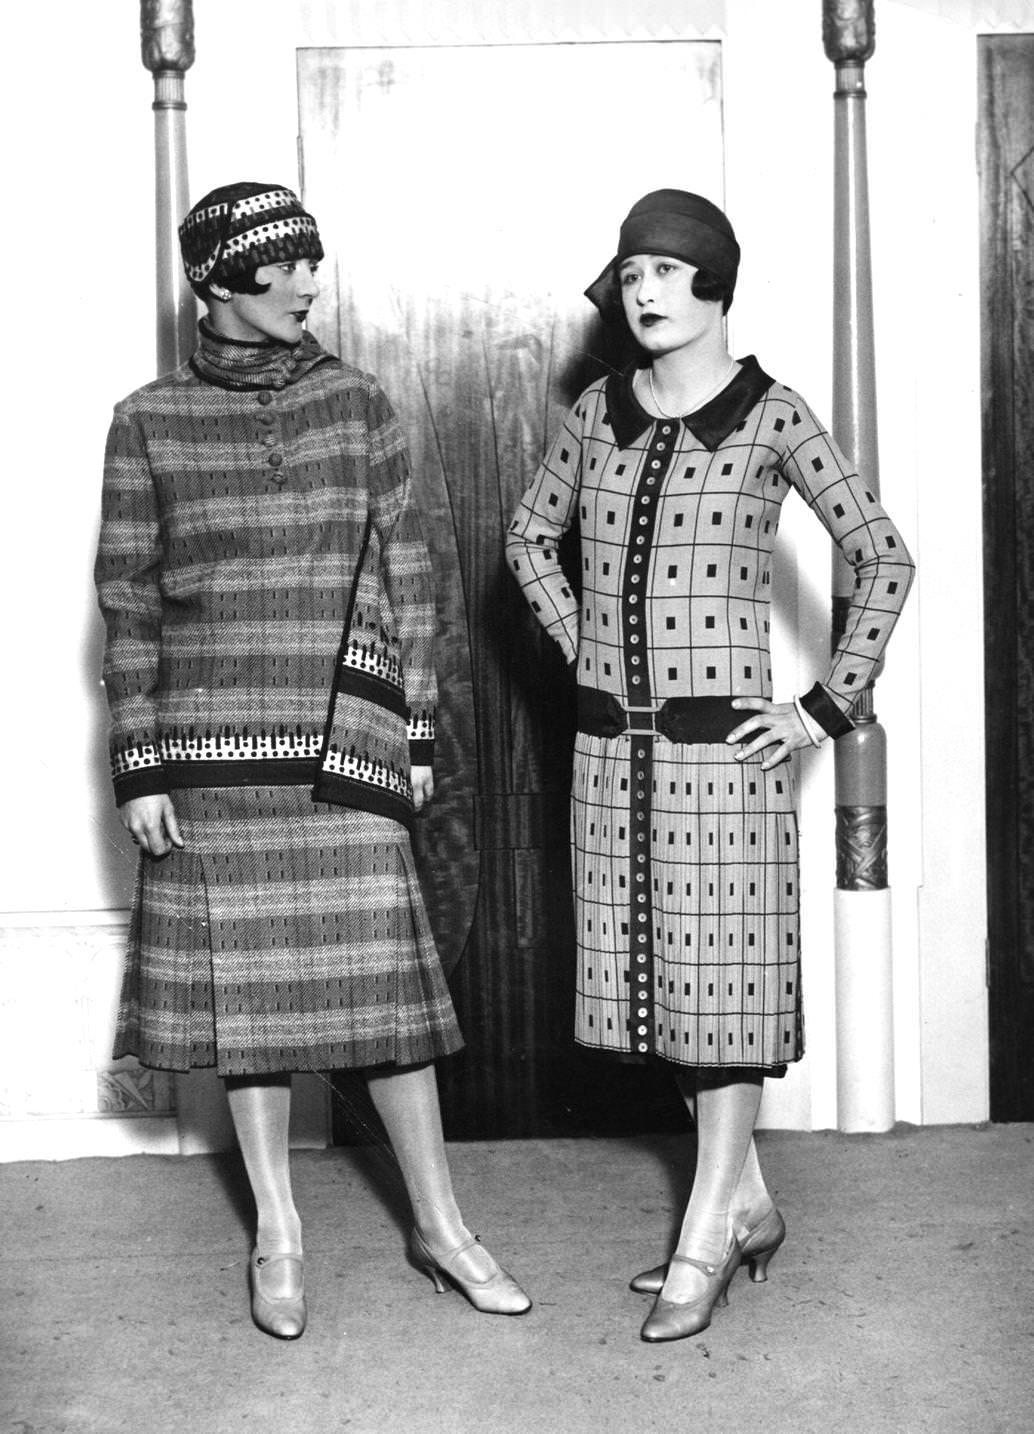 Two women modelling fashionable outfits and cloche hats, 1926